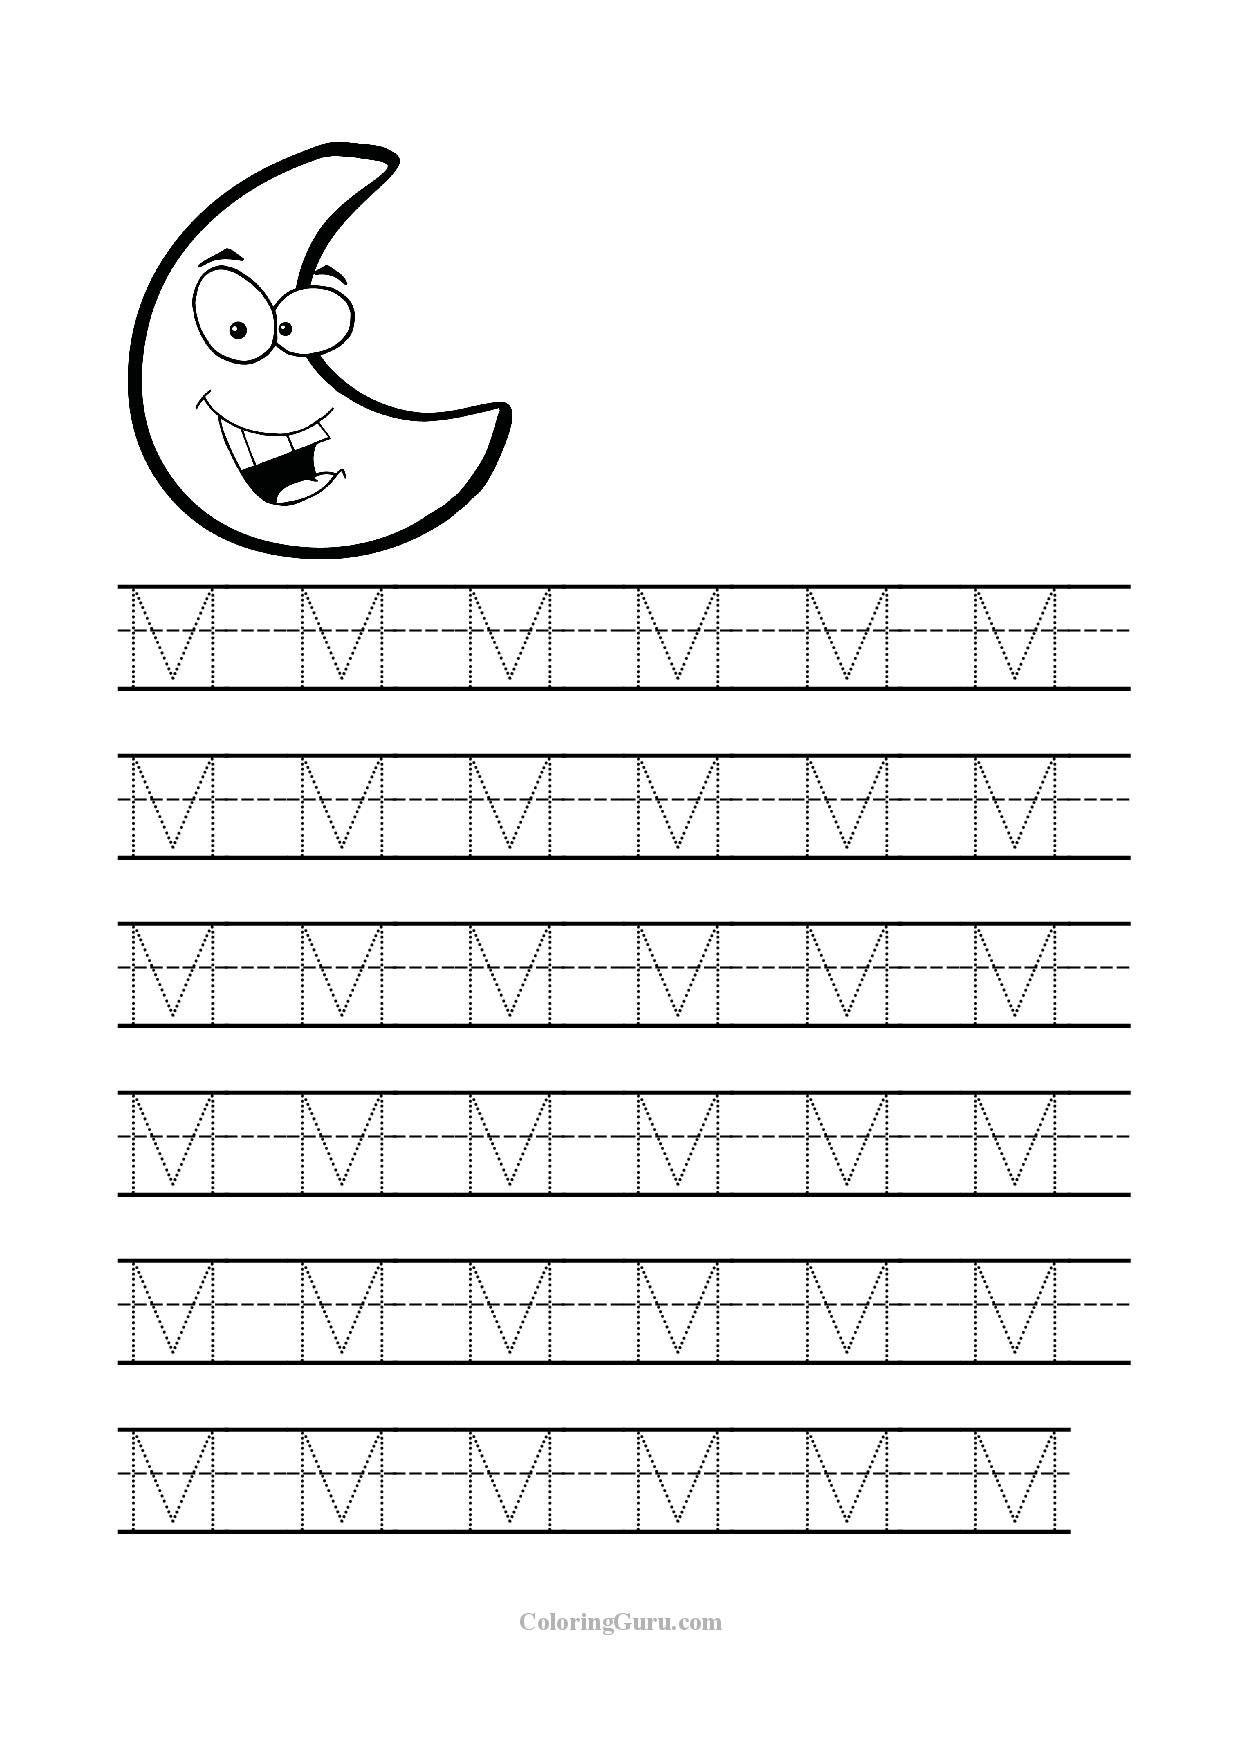 Free Printable Tracing Letter M Worksheets For Preschool with regard to Letter M Tracing Worksheets Preschool